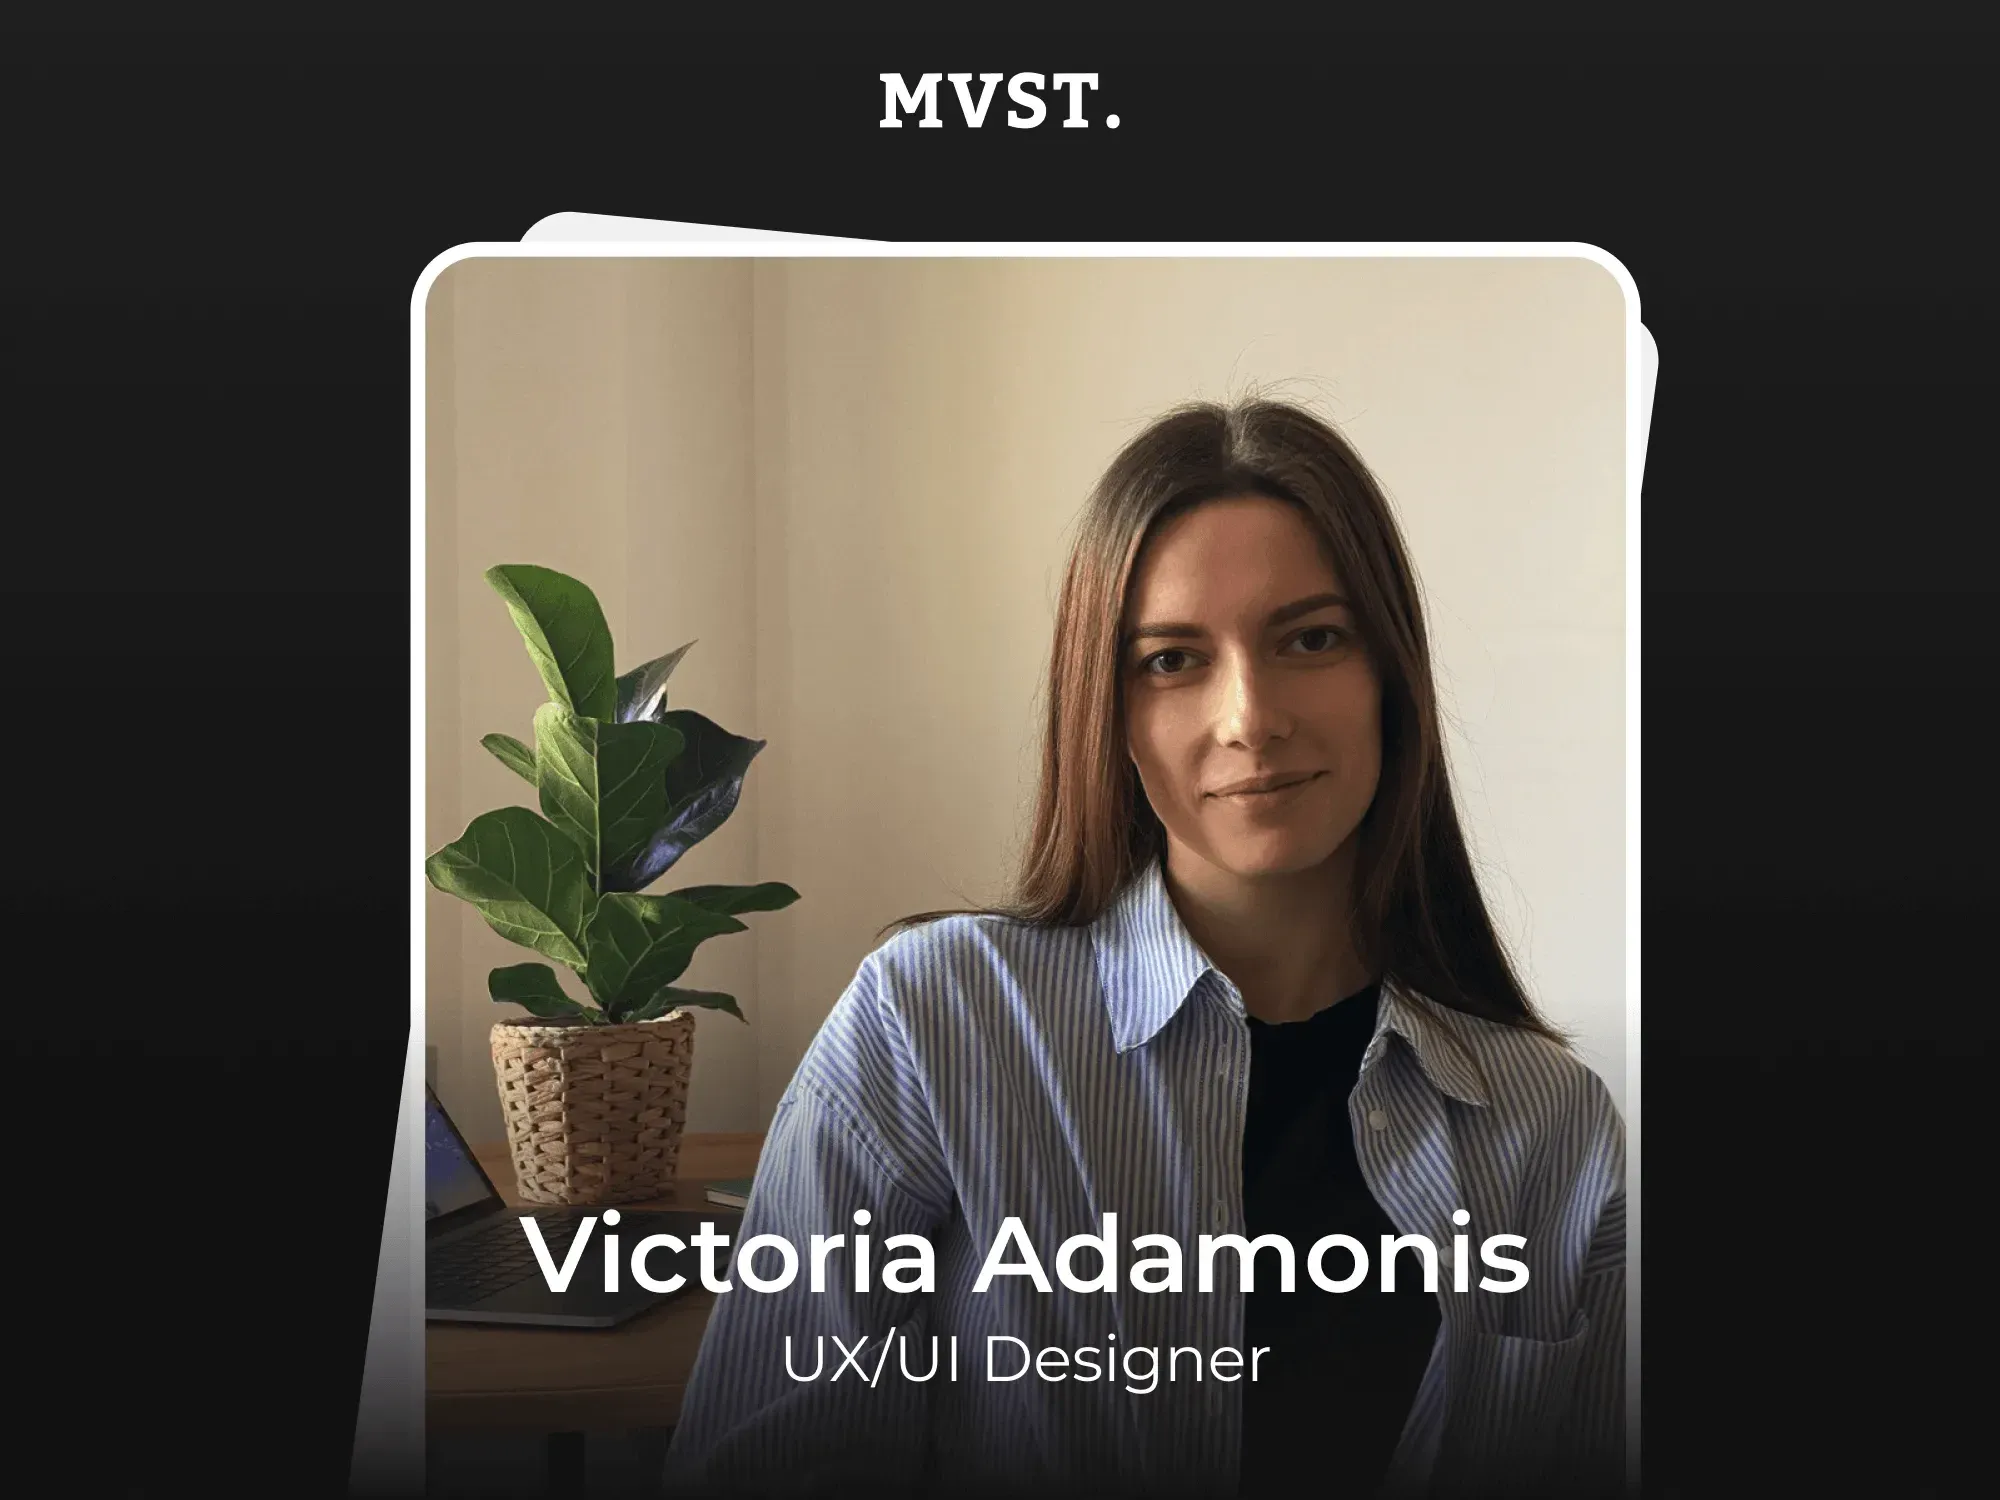 Welcome to MVST, Victoria!